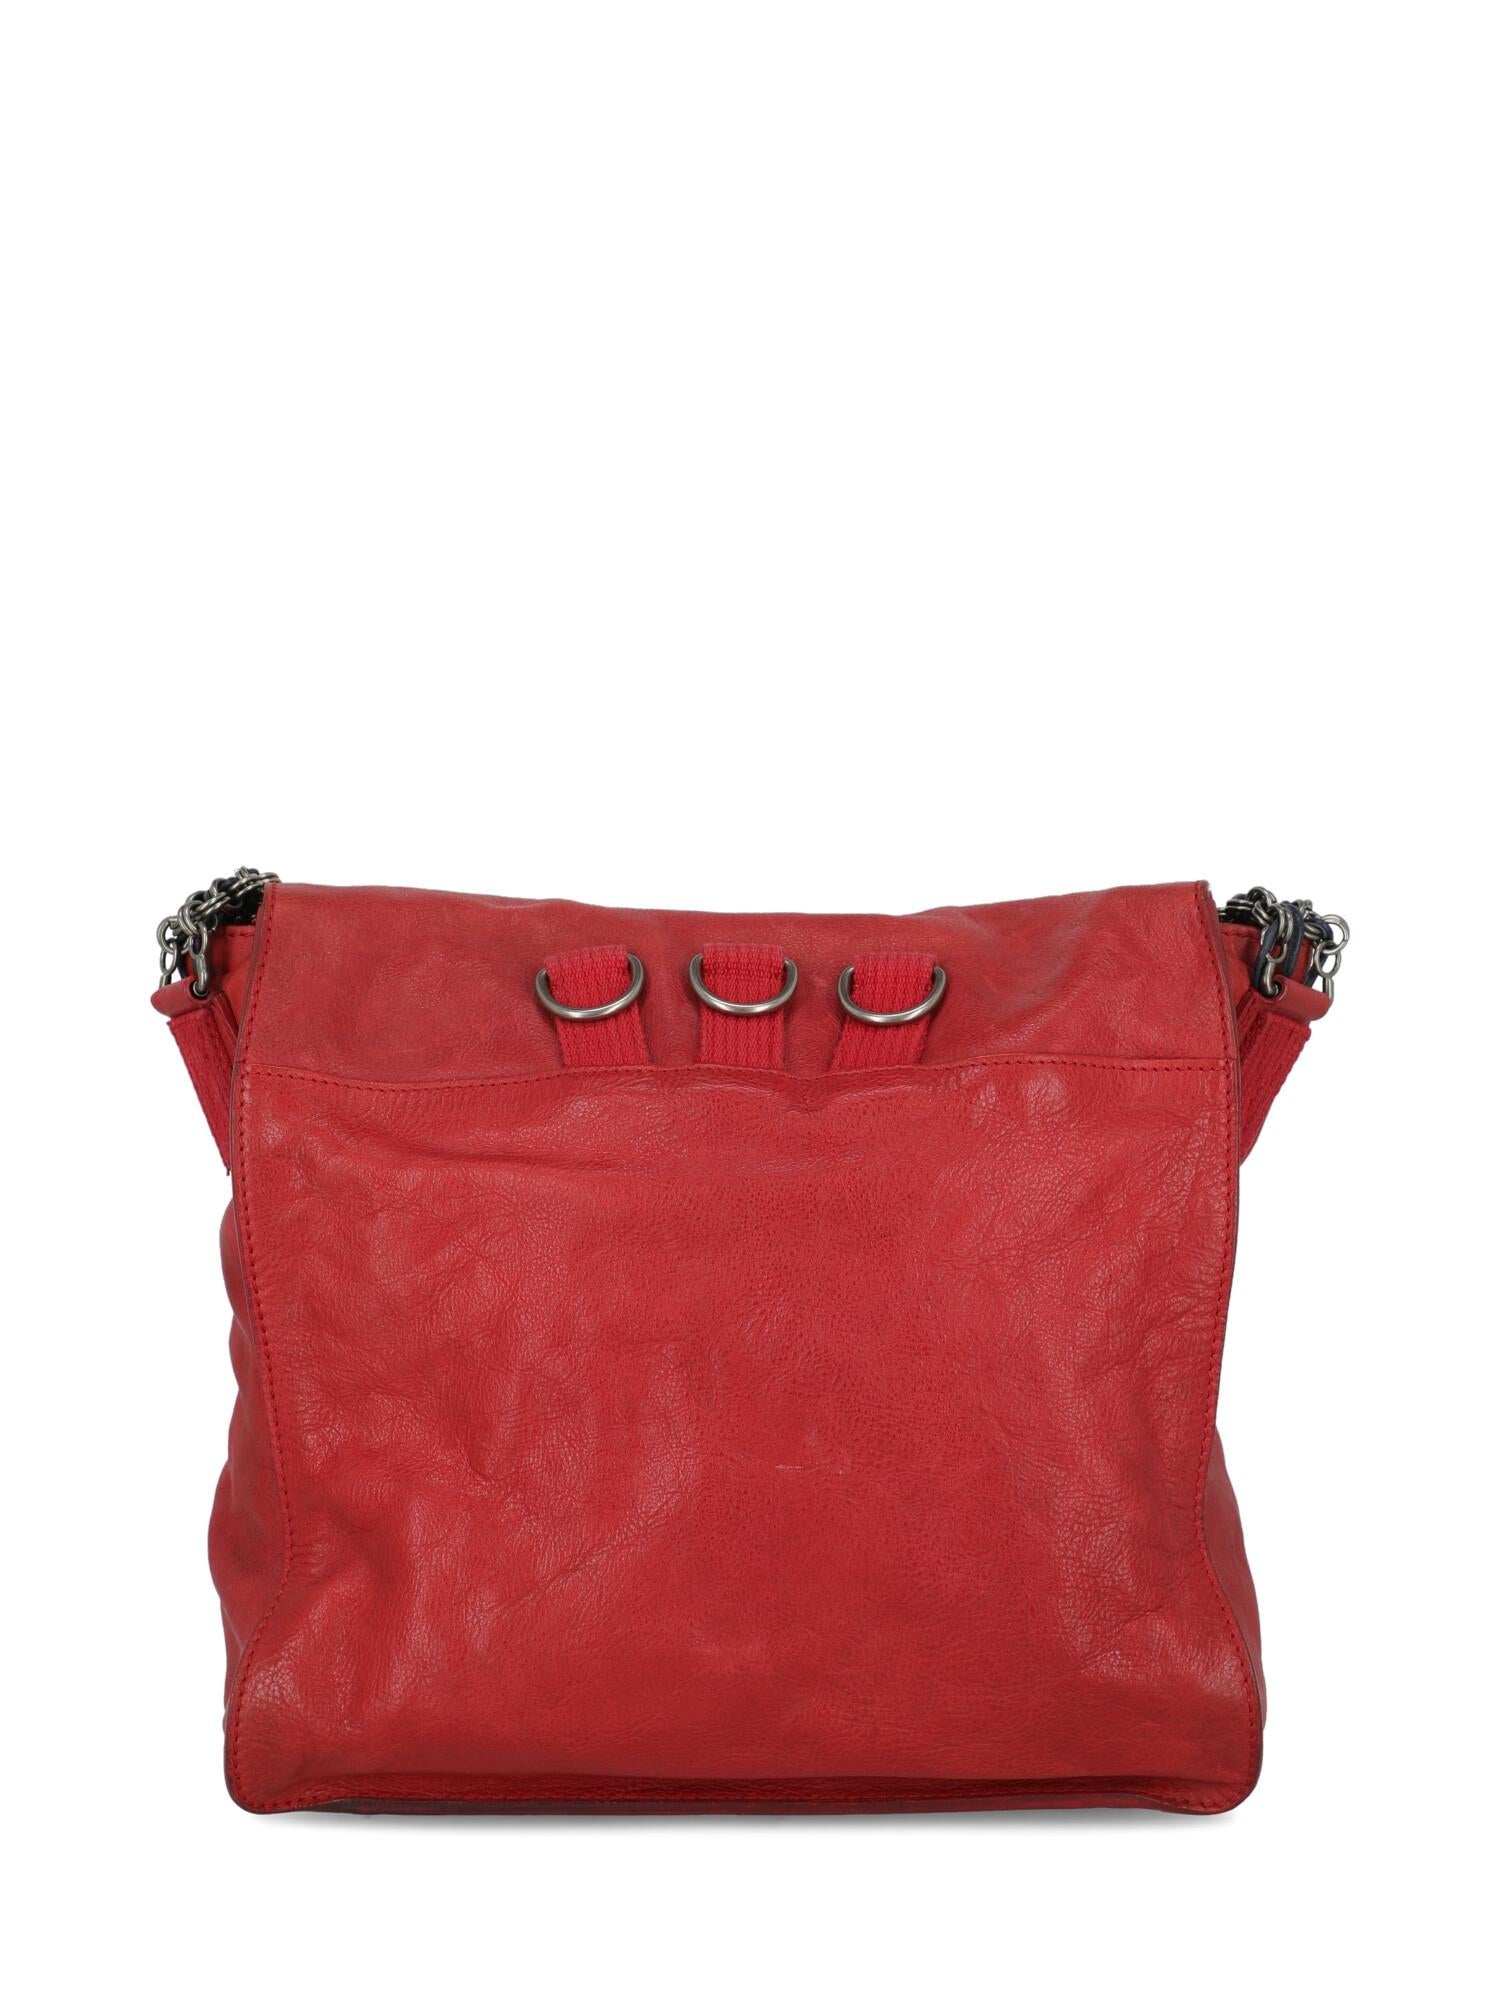 Women's Balenciaga Woman Shoulder bag Red Leather For Sale